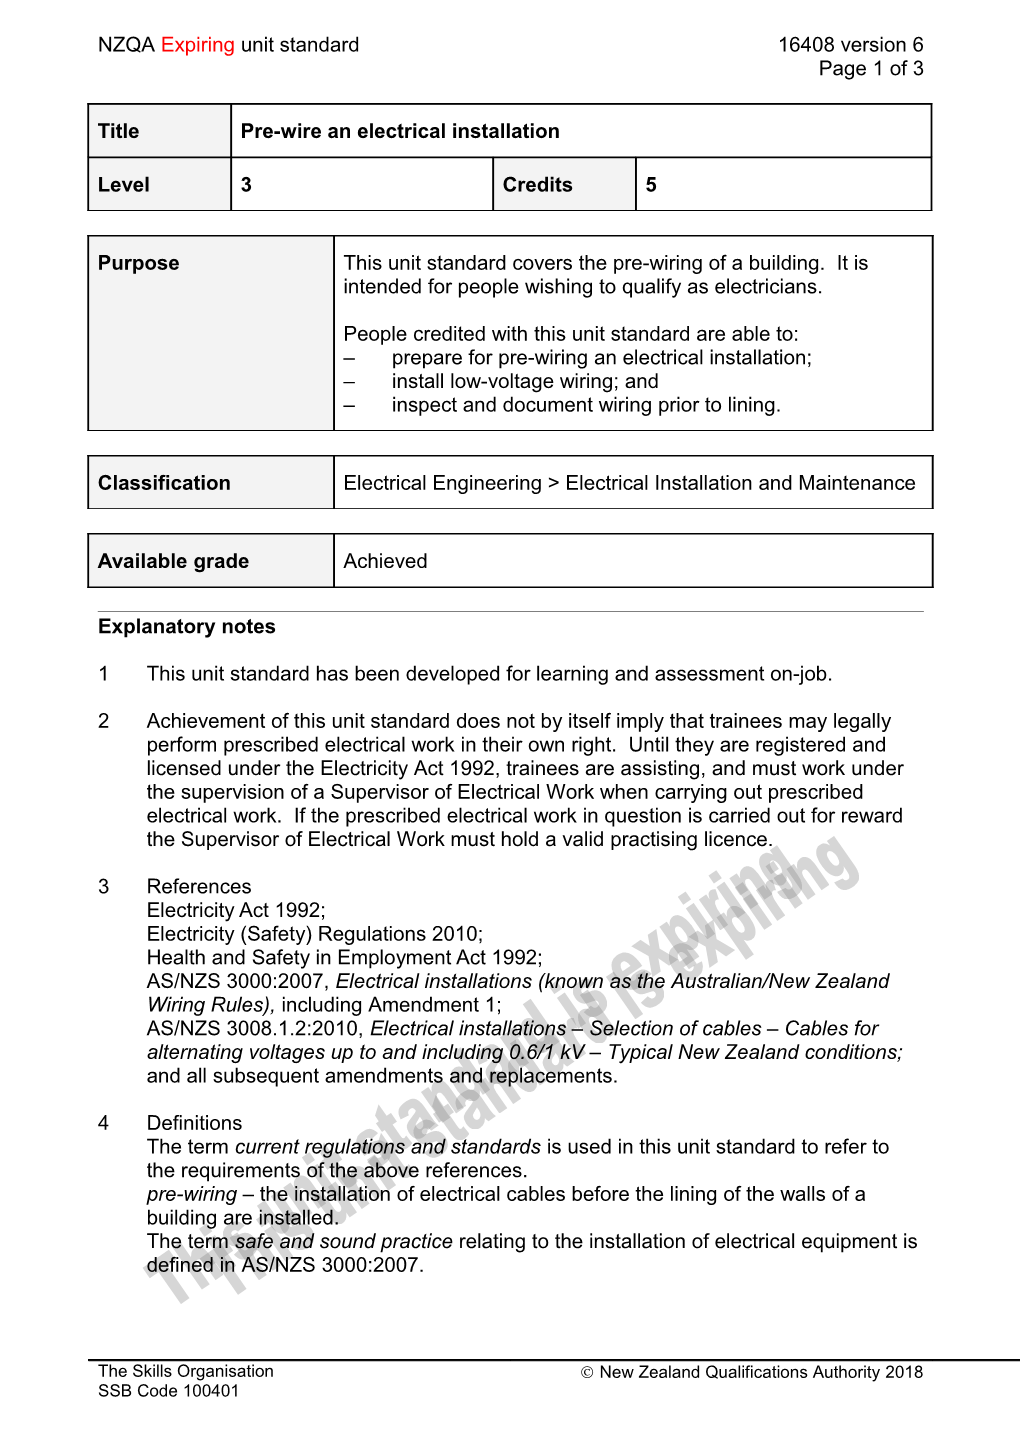 1This Unit Standard Has Been Developed for Learning and Assessment On-Job